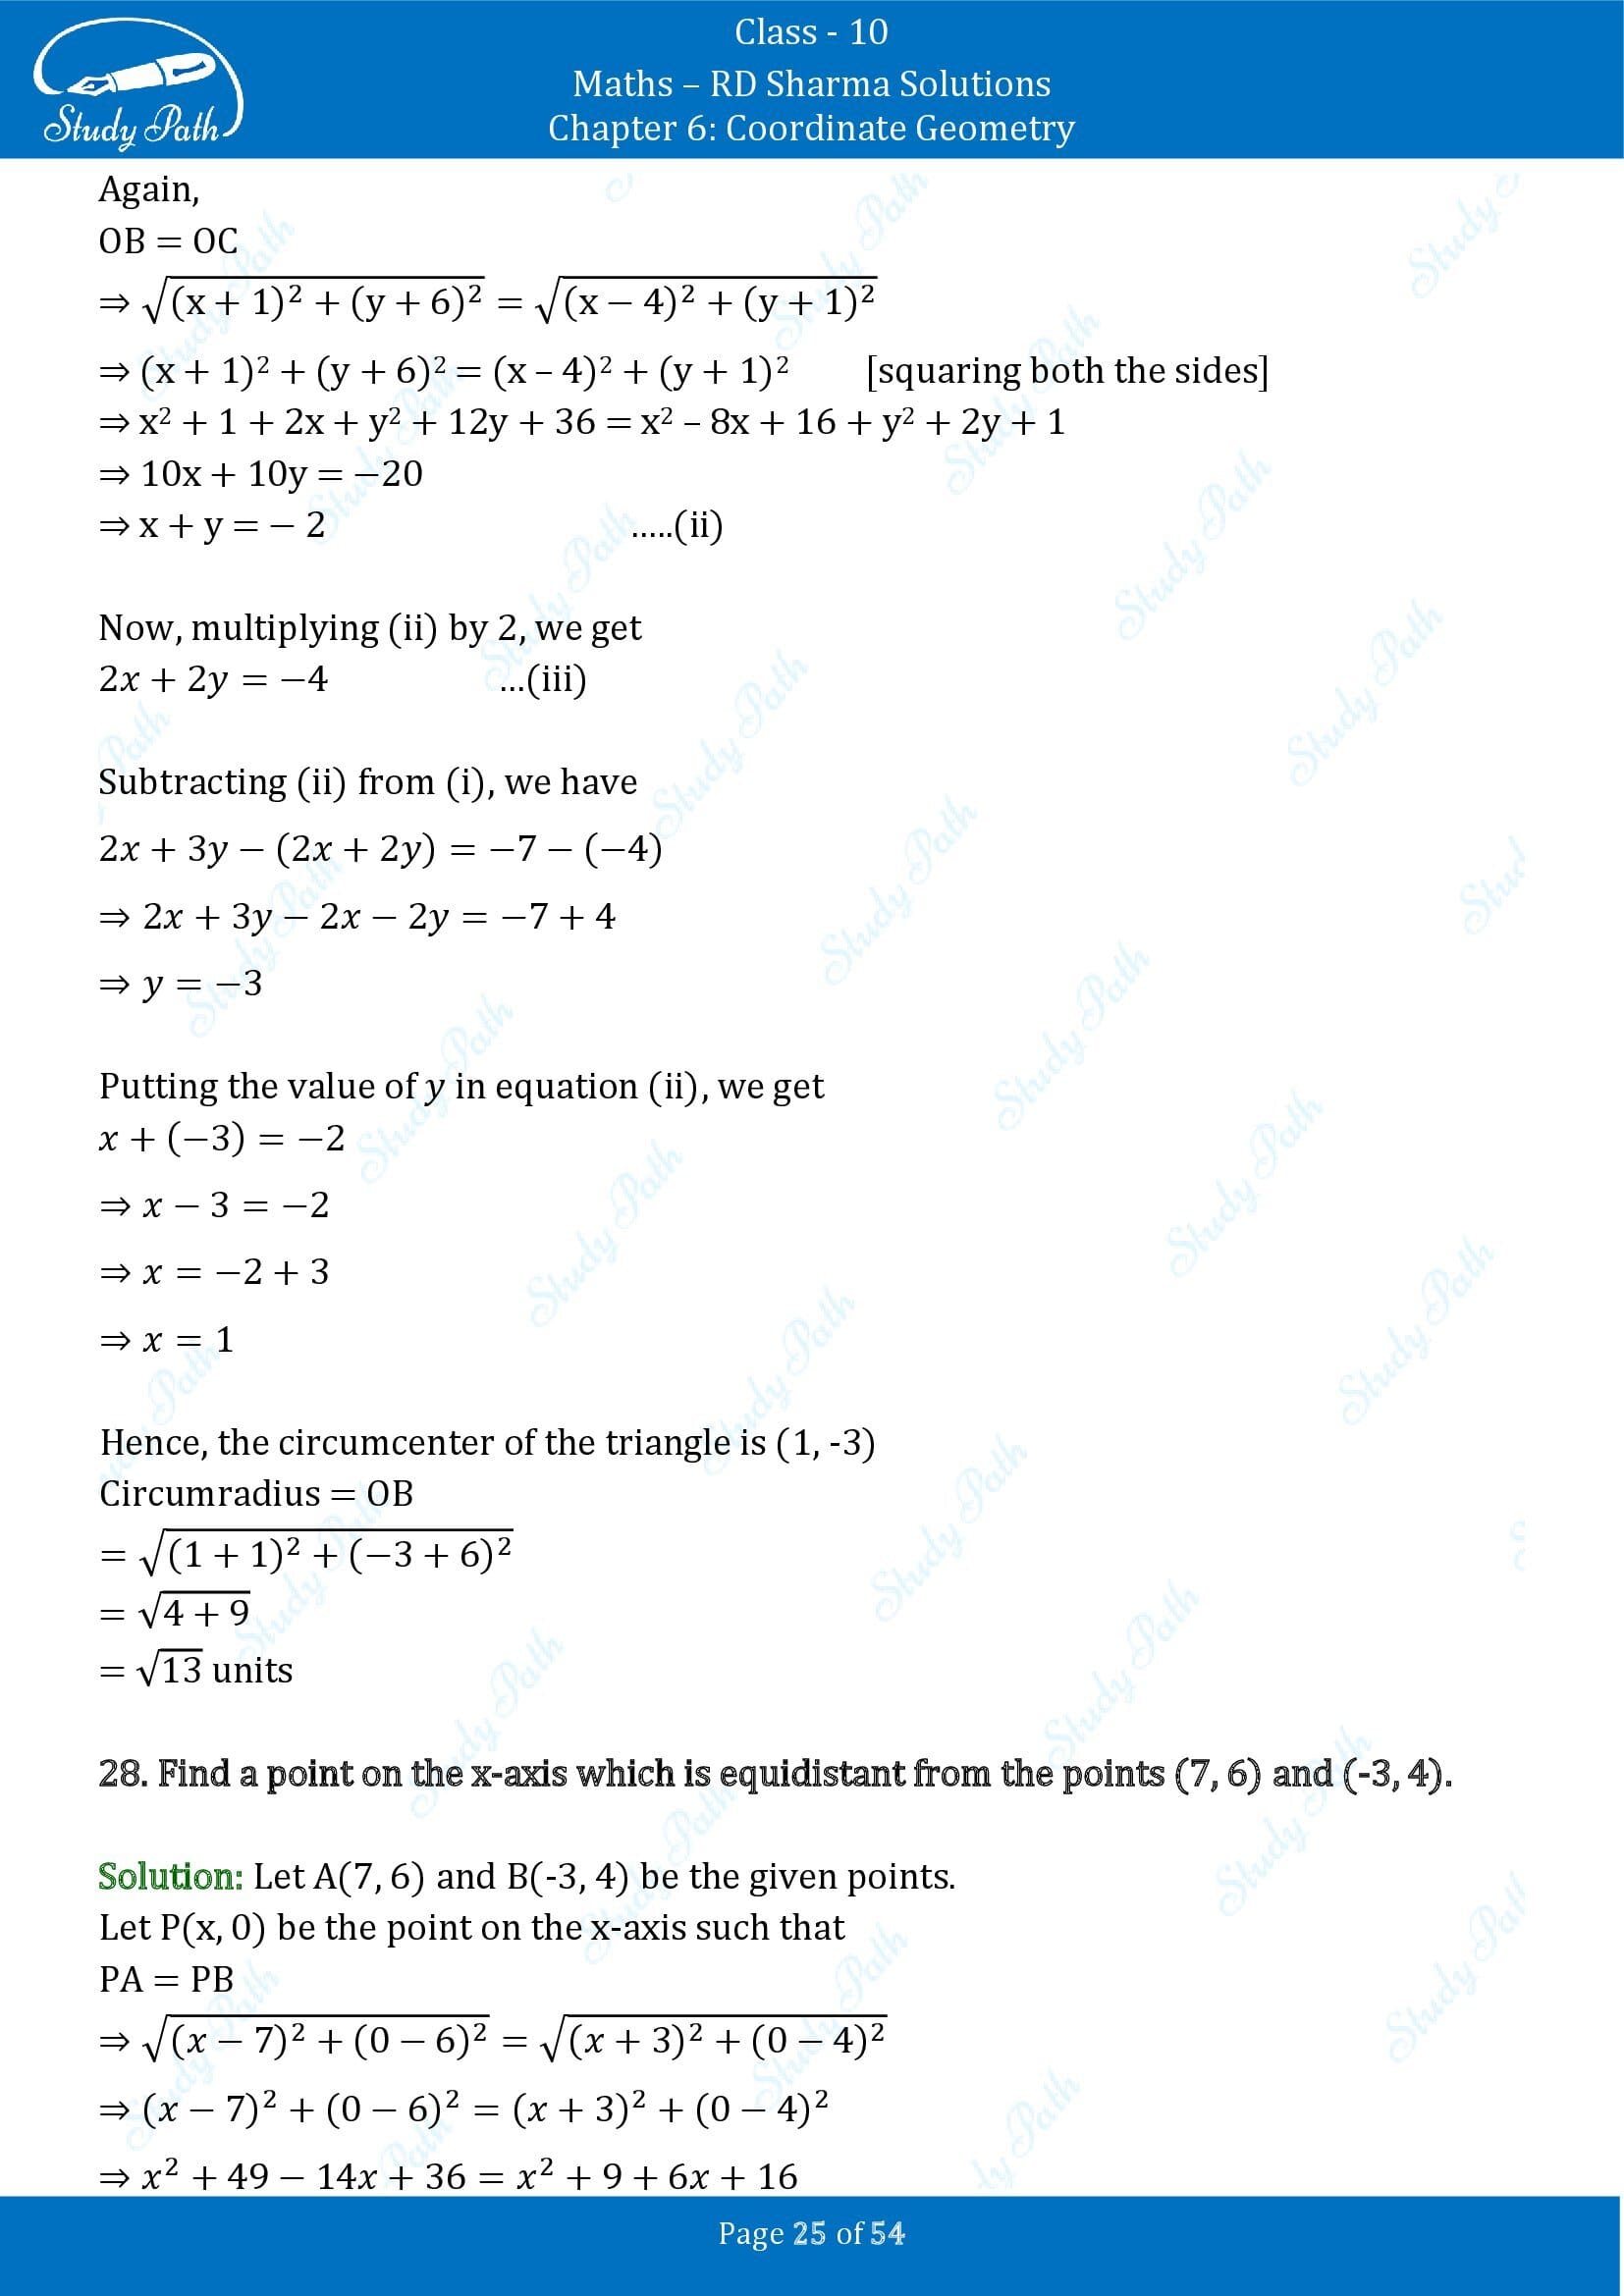 RD Sharma Solutions Class 10 Chapter 6 Coordinate Geometry Exercise 6.2 0025